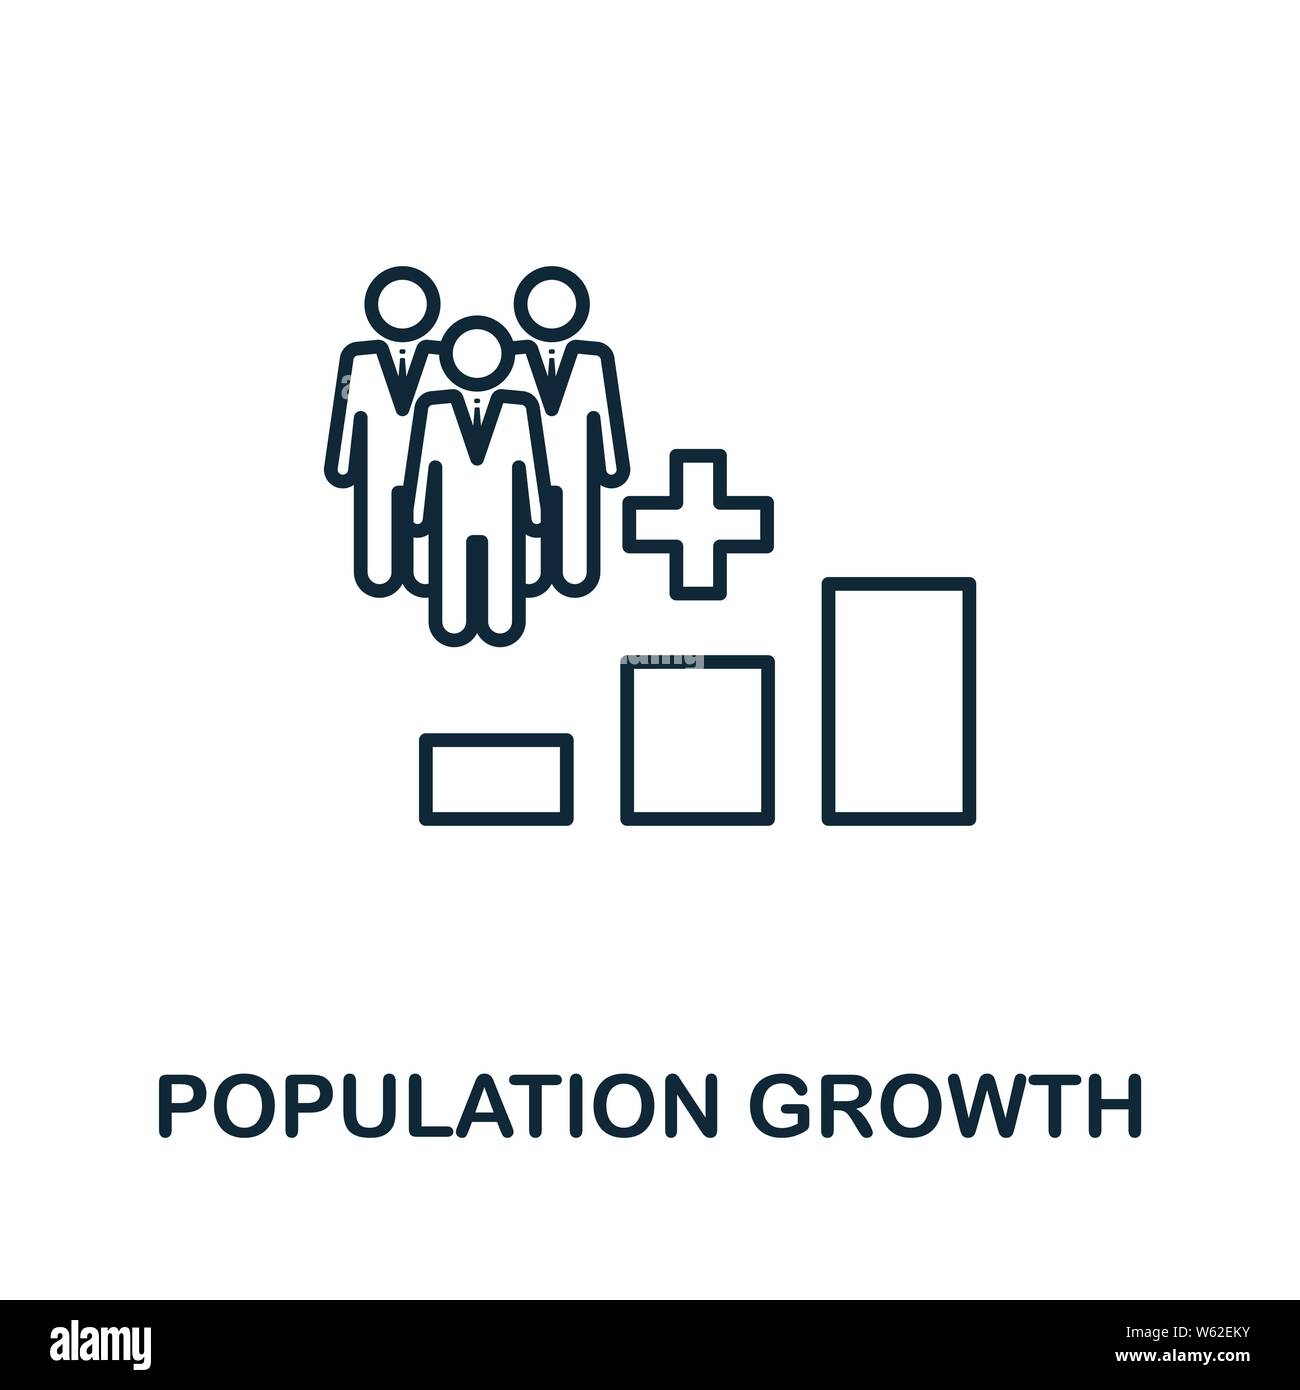 Population Growth outline icon. Thin line style from icons collection. Pixel perfect simple element population growth icon for web design, apps Stock Vector